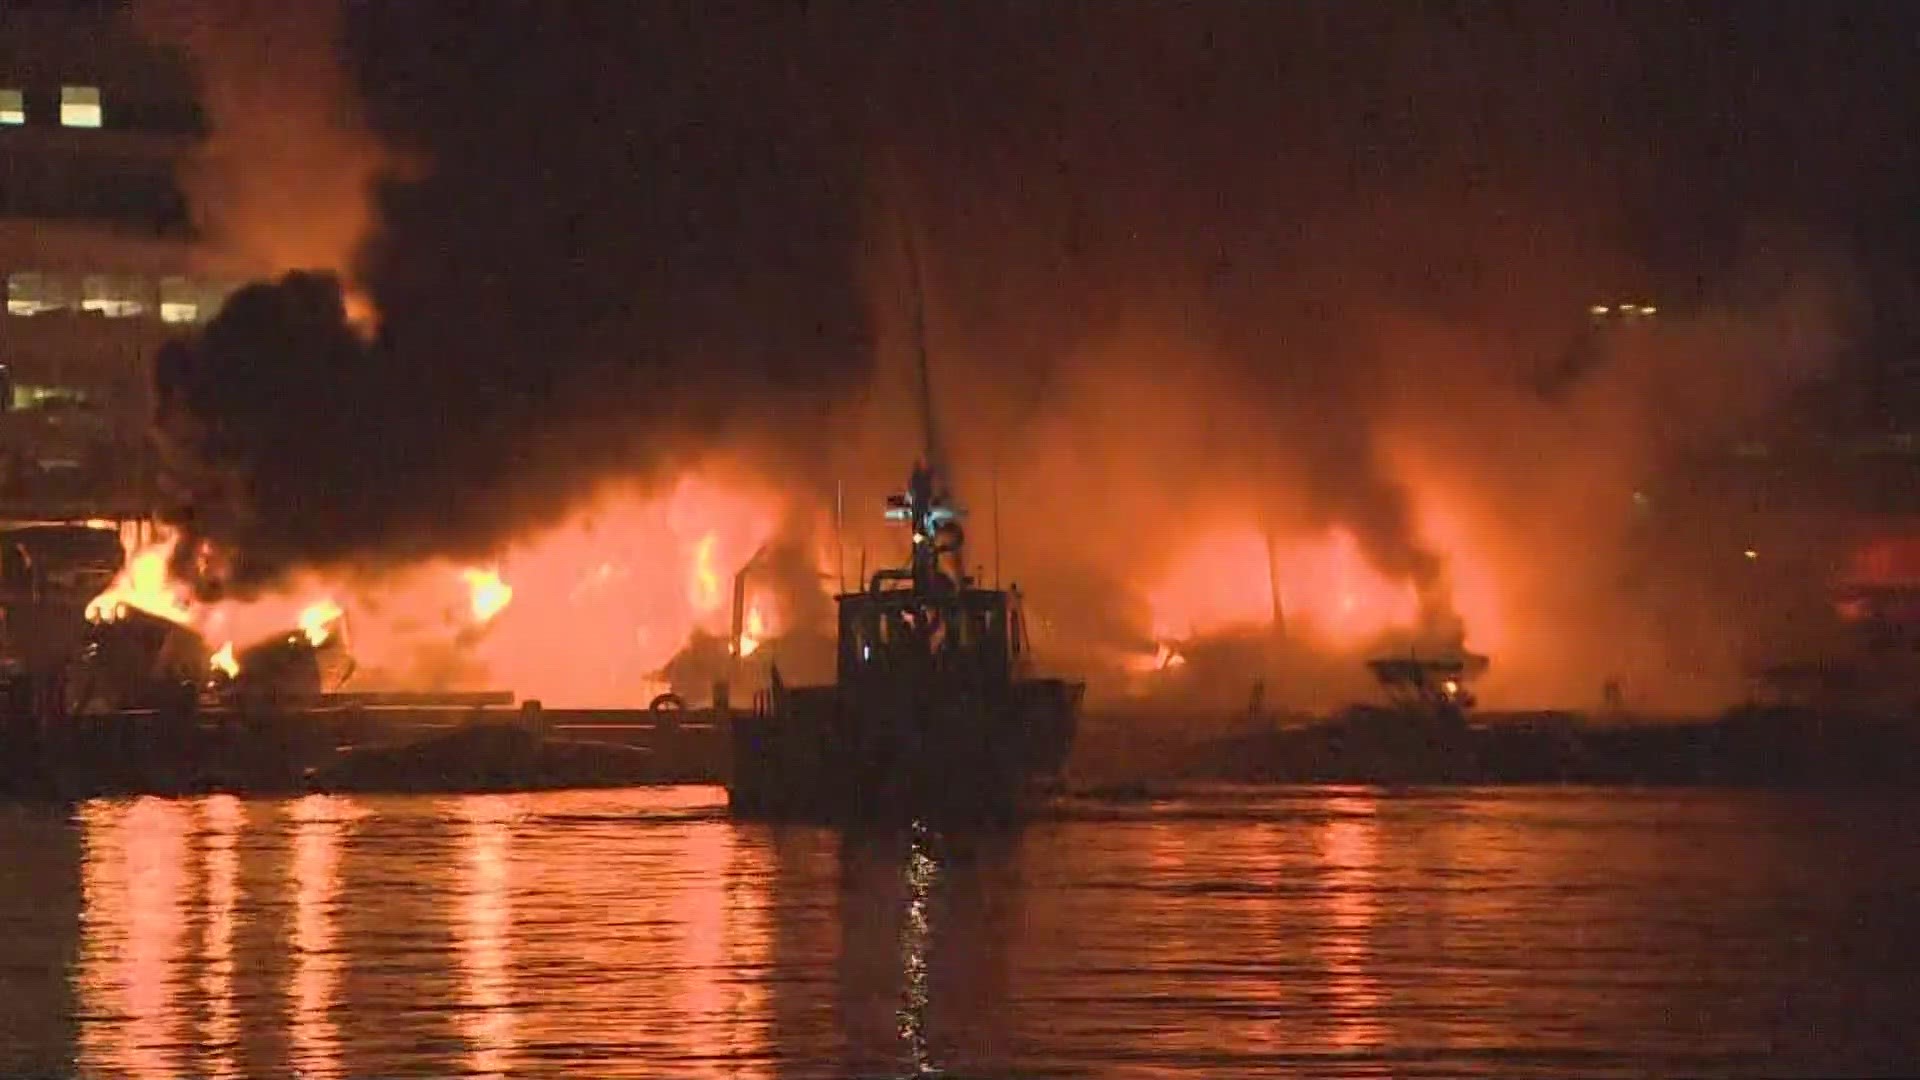 About 30 boats were destroyed in a fire near the Ship Canal Bridge early Wednesday morning.